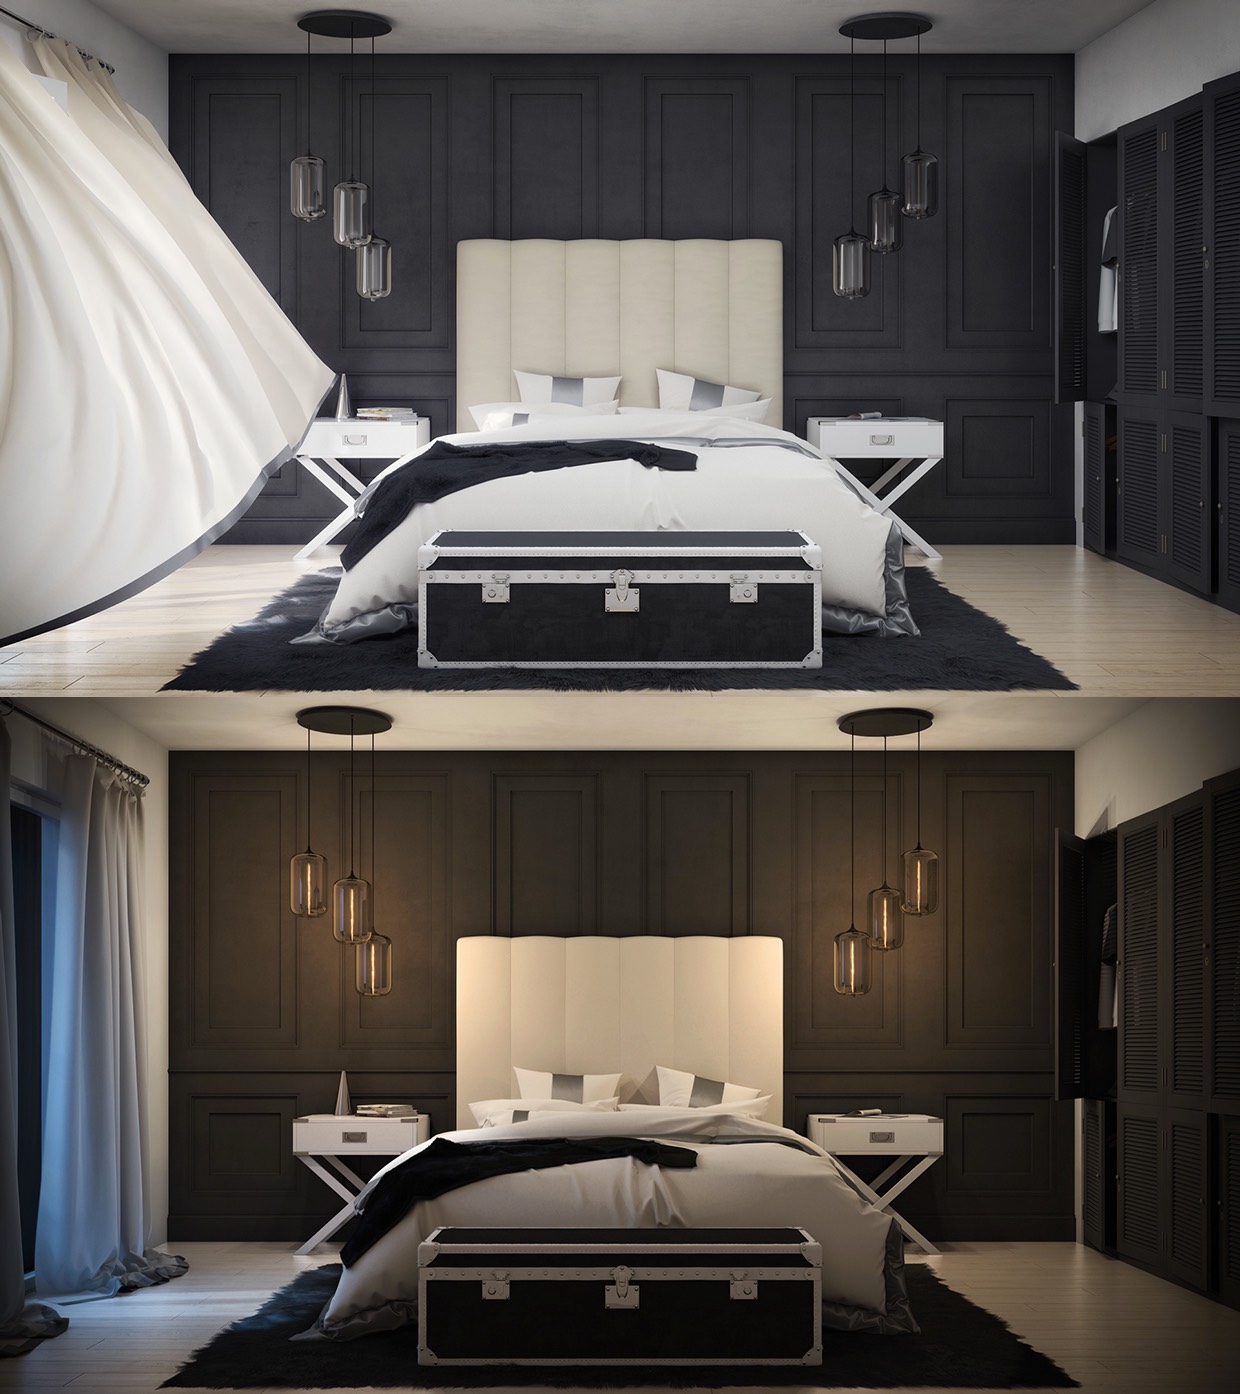 Luxury dark color bedroom design "width =" 1240 "height =" 1394 "srcset =" https://mileray.com/wp-content/uploads/2020/05/1588508328_473_Introducing-Gorgeous-Bedroom-Decorating-Ideas-Completed-With-Perfect-Organizing-Which.jpg 1240w, https: // myfashionos. com / wp-content / uploads / 2016/08 / CG-Wisdom-267x300.jpg 267w, https://mileray.com/wp-content/uploads/2016/08/CG-Wisdom-768x863.jpg 768w, https: //mileray.com/wp-content/uploads/2016/08/CG-Wisdom-911x1024.jpg 911w, https://mileray.com/wp-content/uploads/2016/08/CG-Wisdom-696x782.jpg 696w, https://mileray.com/wp-content/uploads/2016/08/CG-Wisdom-1068x1201.jpg 1068w, https://mileray.com/wp-content/uploads/2016/08/CG-Wisdom -374x420.jpg 374w "sizes =" (maximum width: 1240px) 100vw, 1240px